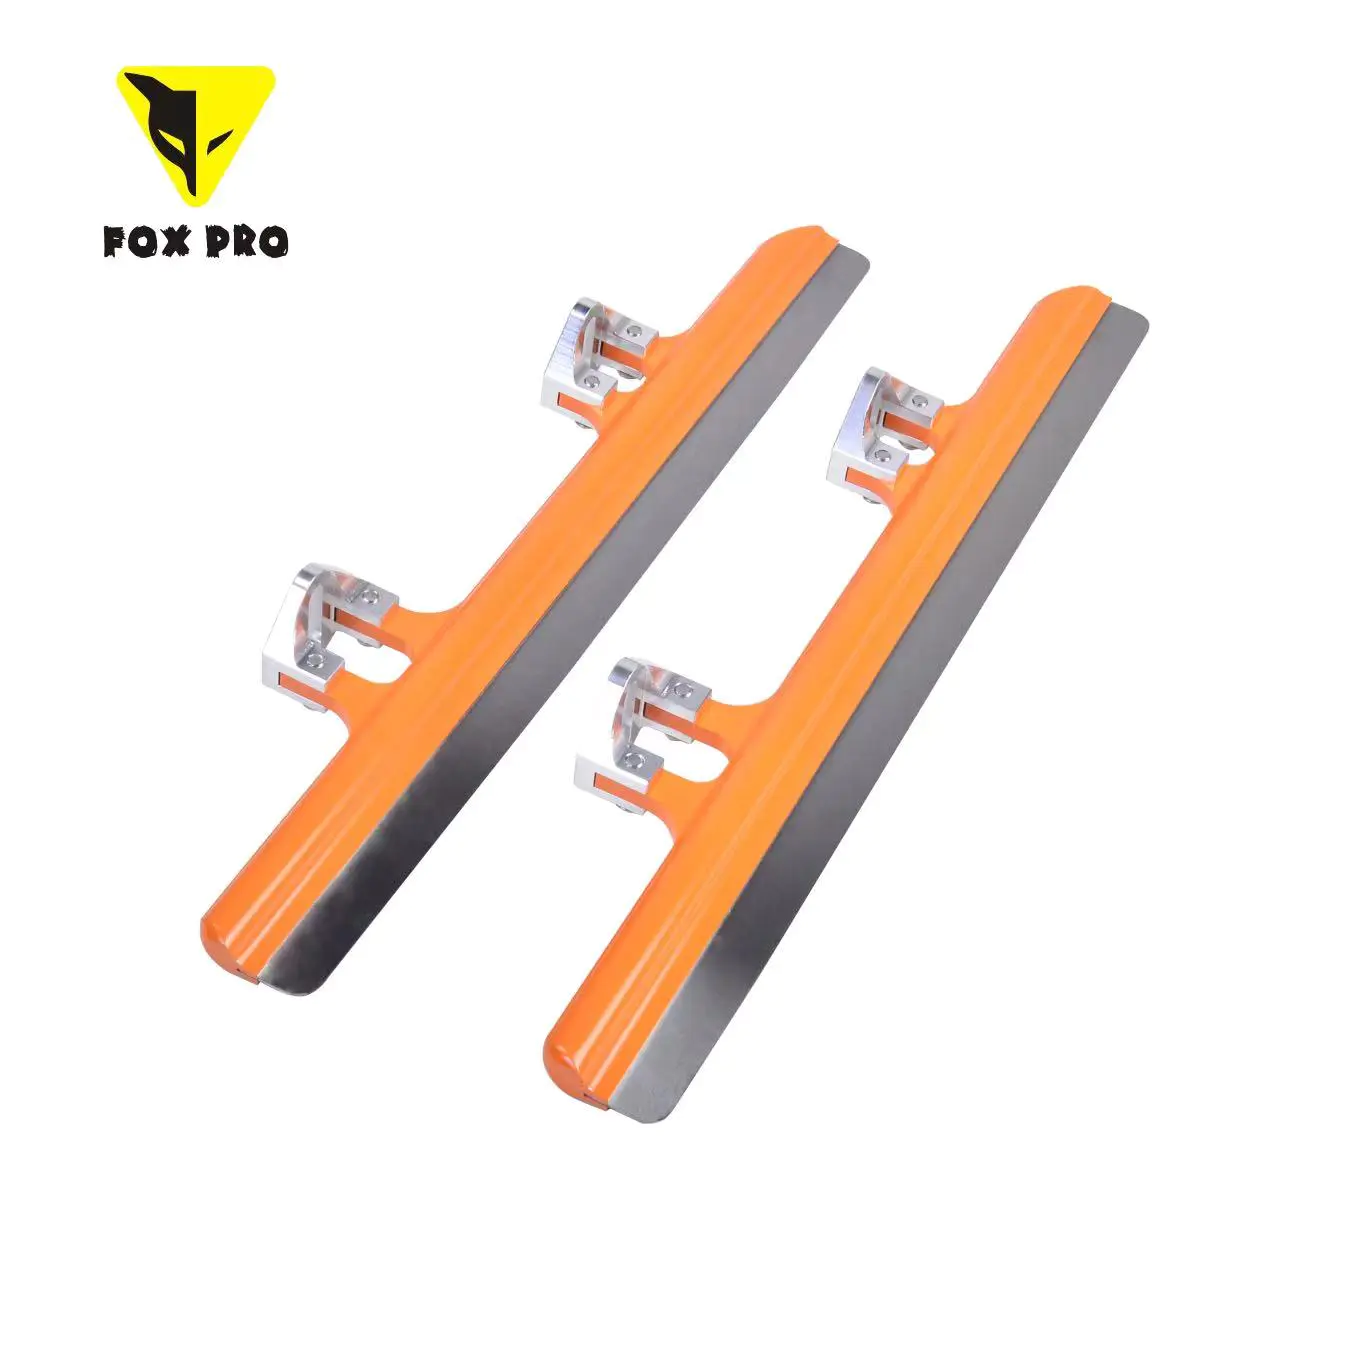 FOX PRO 61 HRC Short Track Ice Skate Blades CNC Aluminum 7005 Ice Skate Blades For professional competition